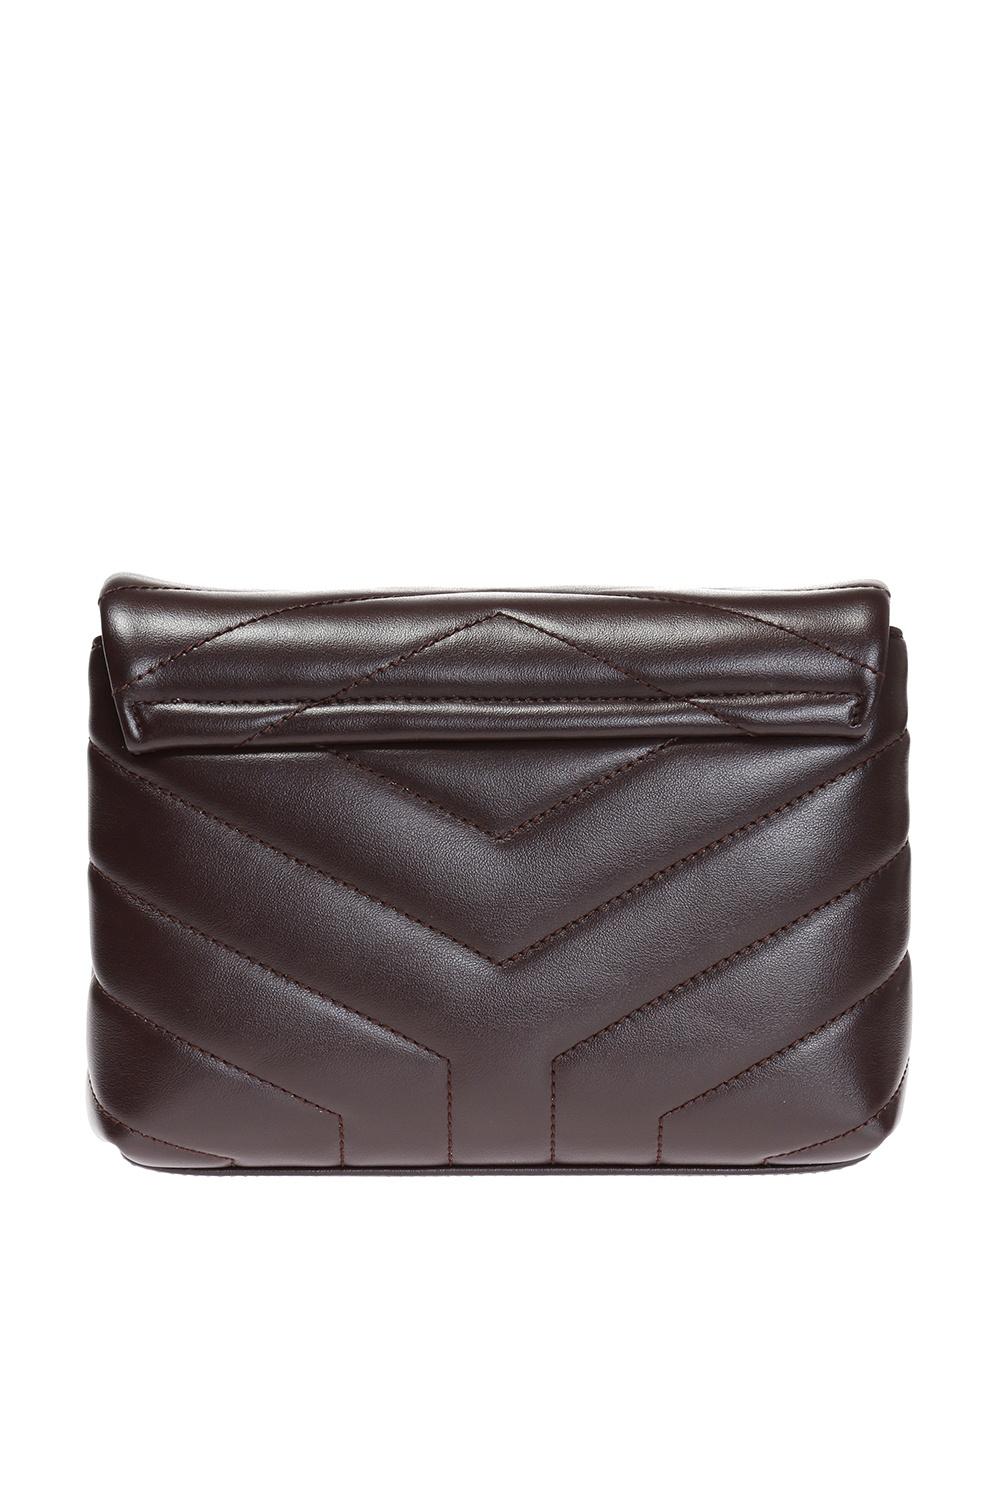 Saint Laurent Dark Brown / Plum Leather Loulou Toy Strap Shoulder Bag

This Saint Laurent monogram bag features Y-quilted overstitching, a removable and adjustable leather shoulder strap, magnetic snap fastening, and a front flap decorated with